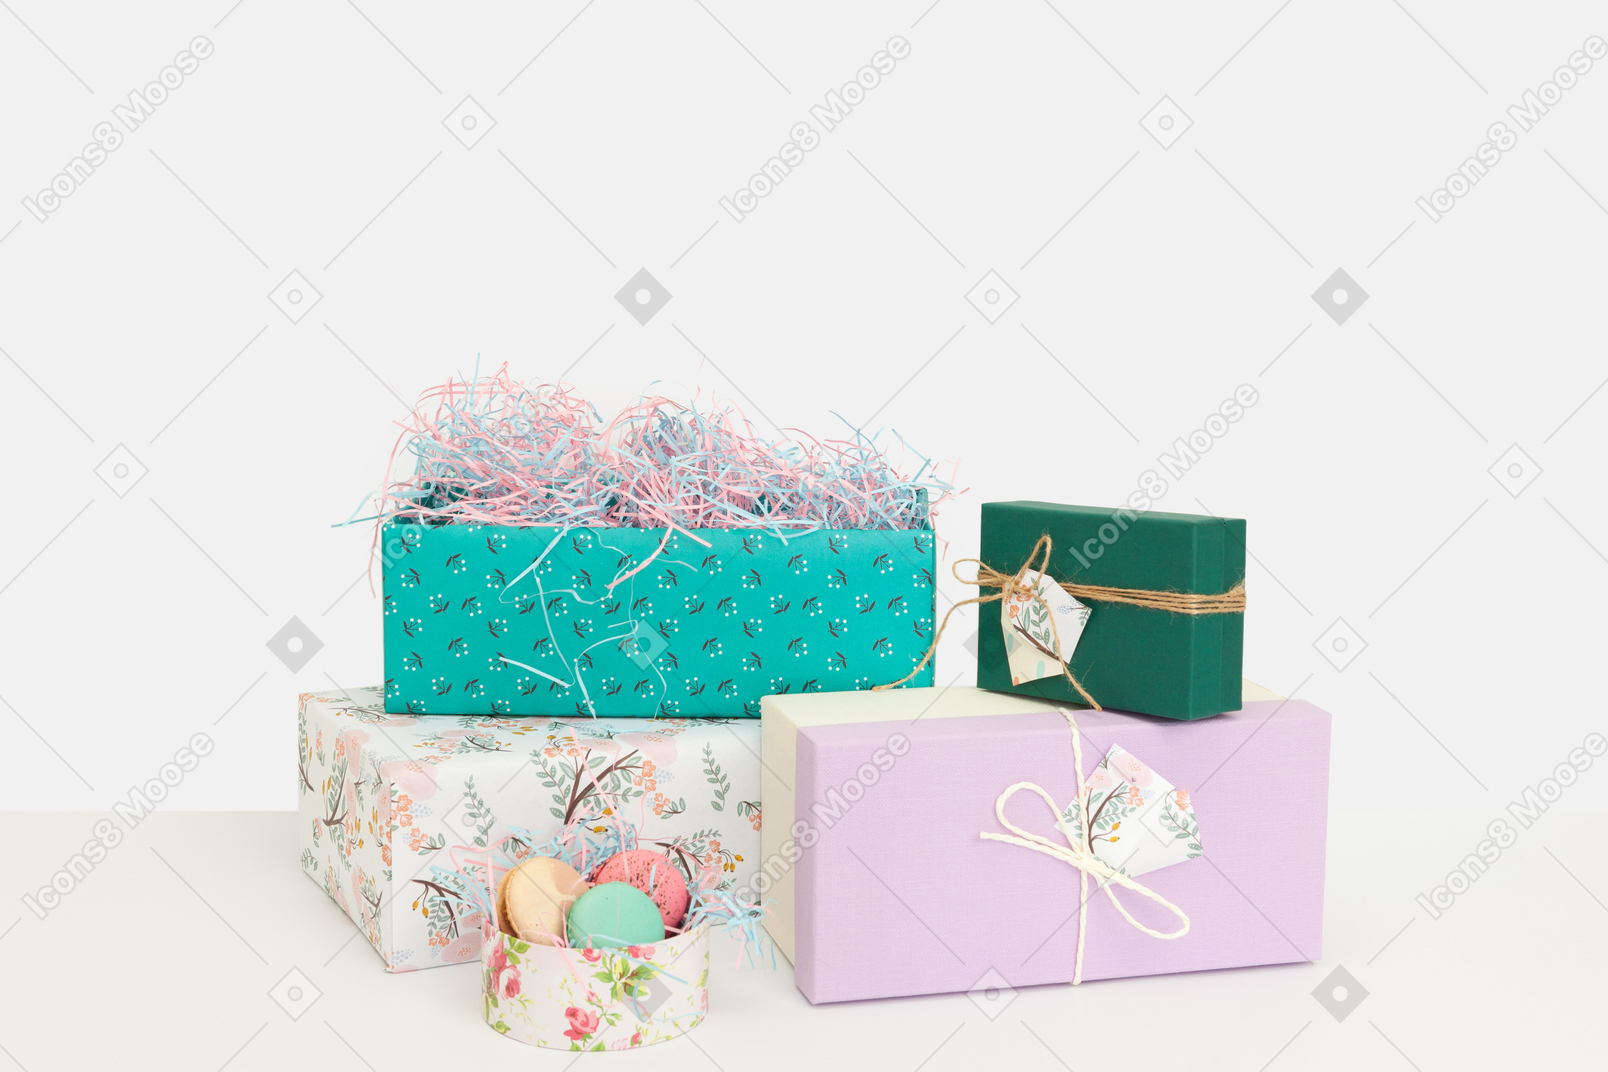 Colorful wrapped gift boxes